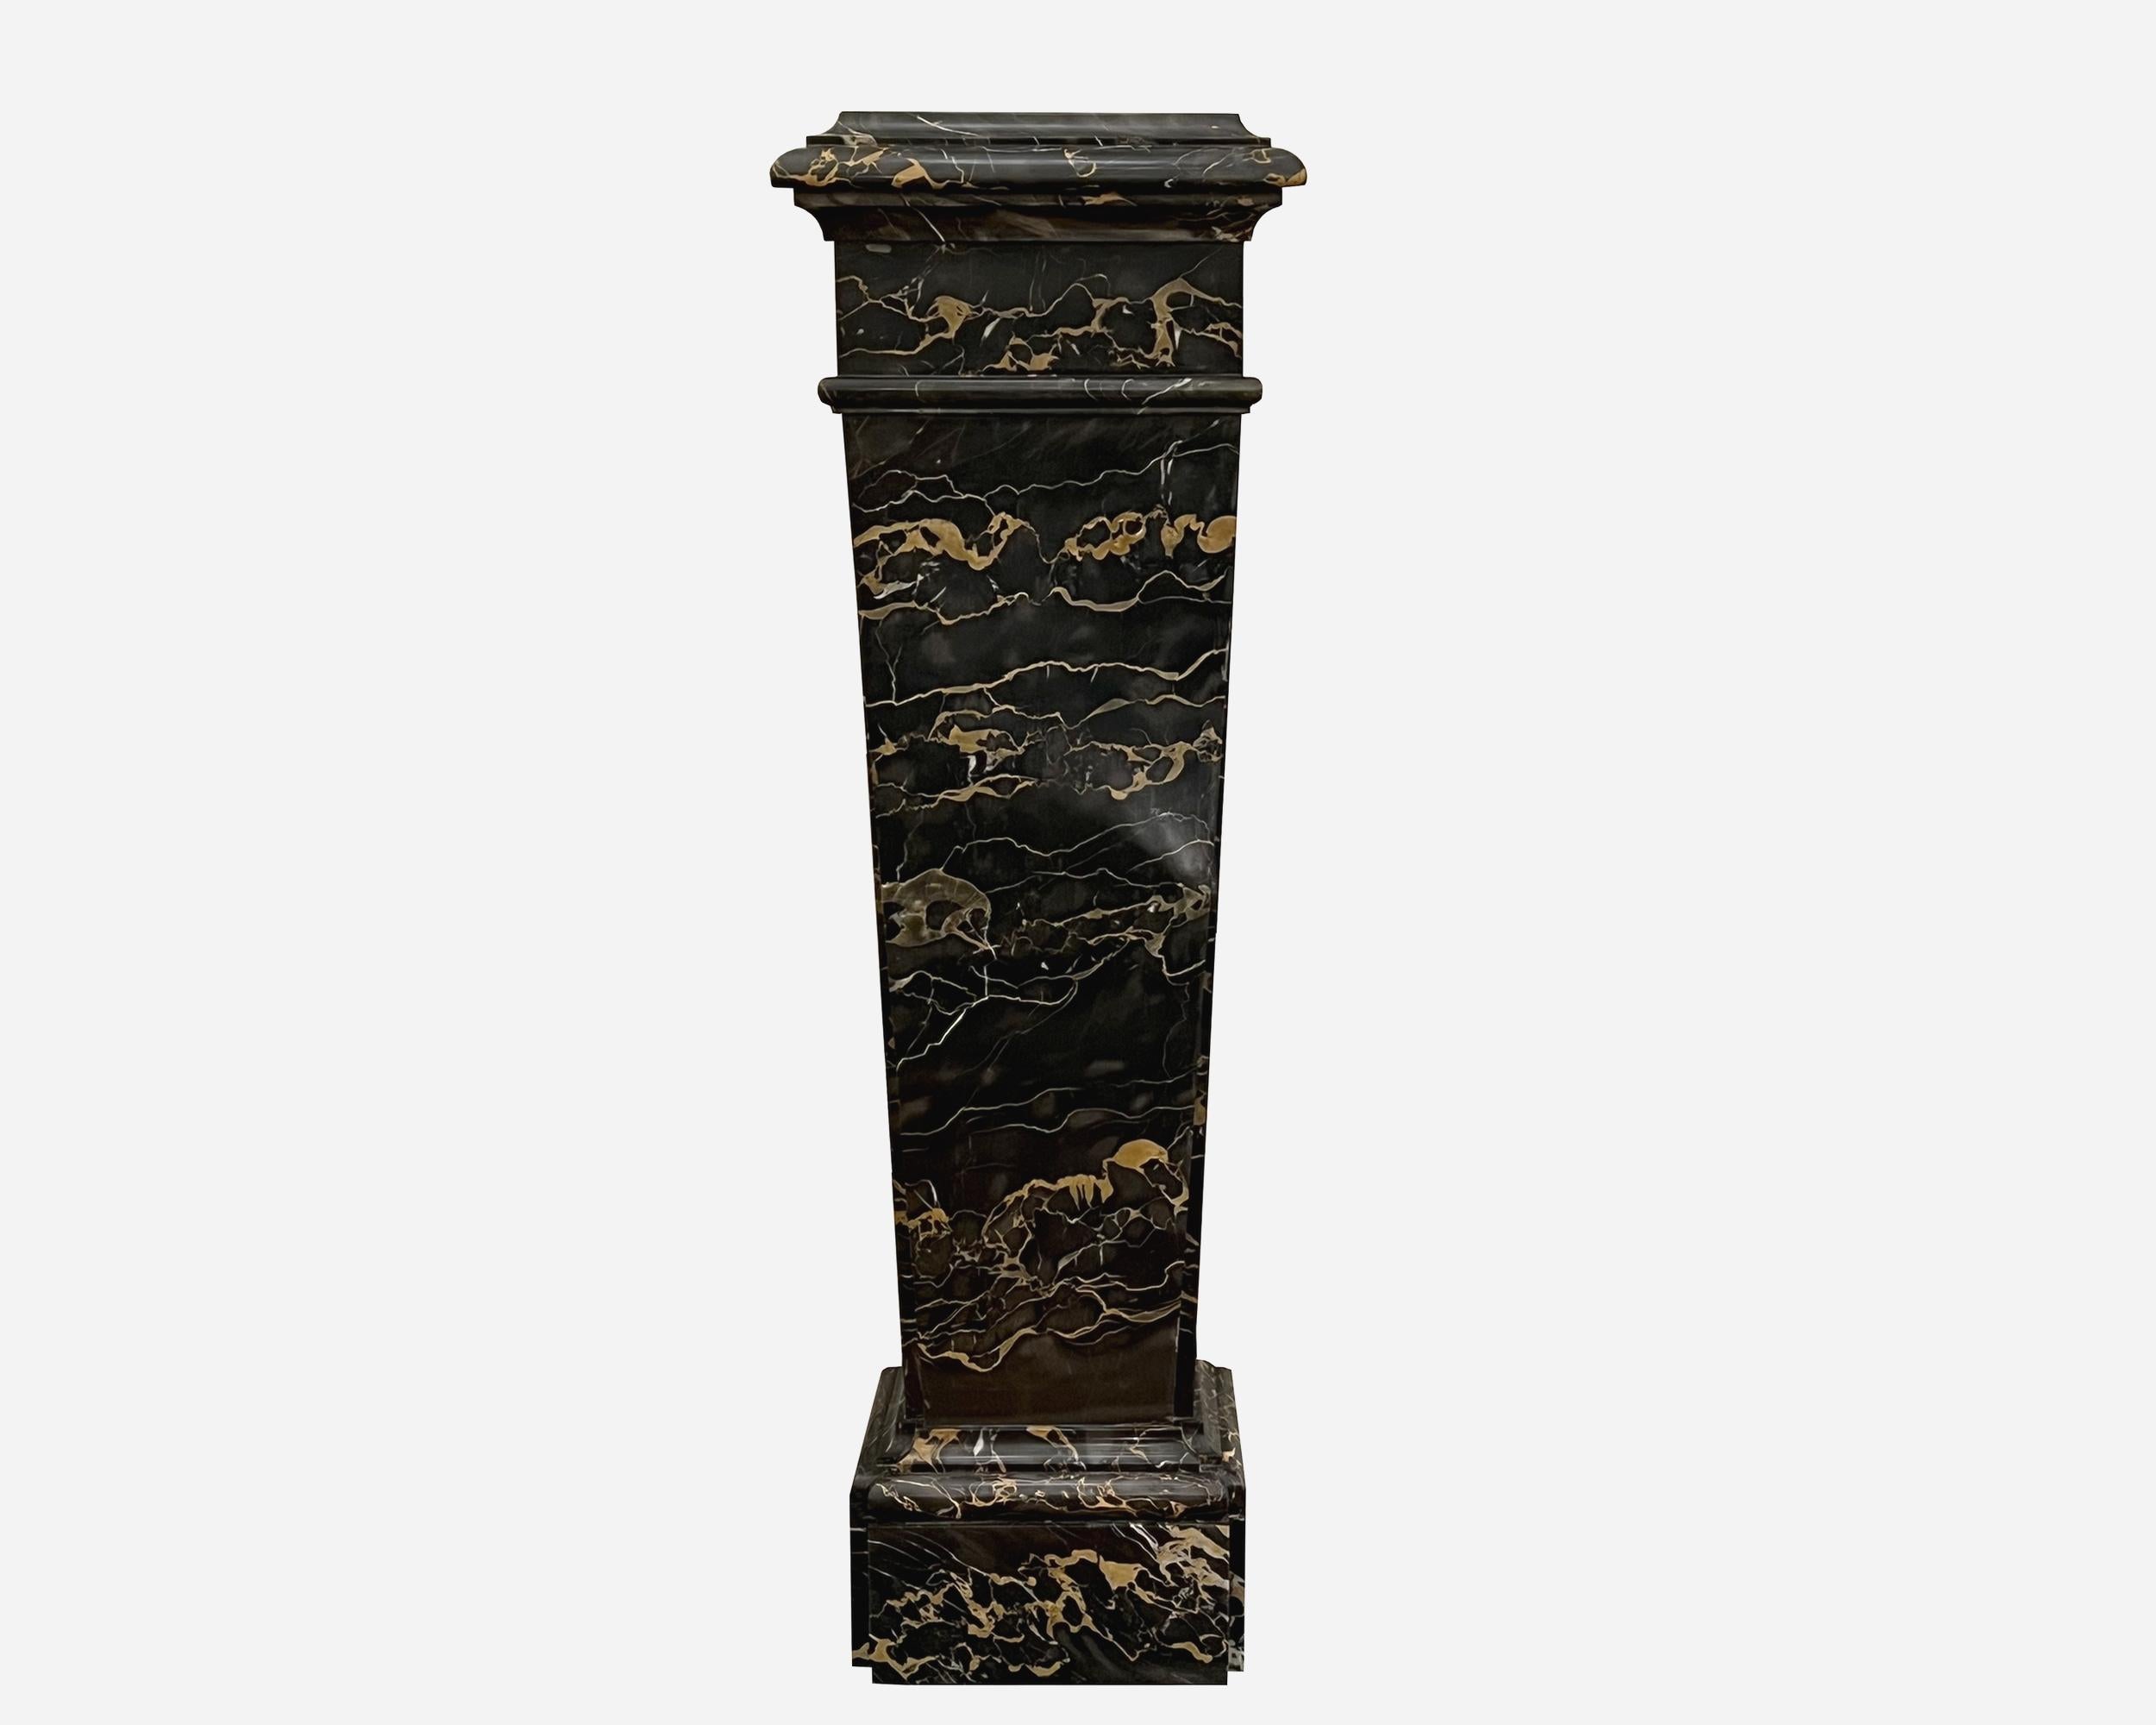 Portor marble pedestal in Directoire style.

Portor marble is a rare and noble marble, used since Antiquity for its unique black color veined with a deep yellow. Exploited by King Louis XIV for the decoration of Versailles, it was used for luxury